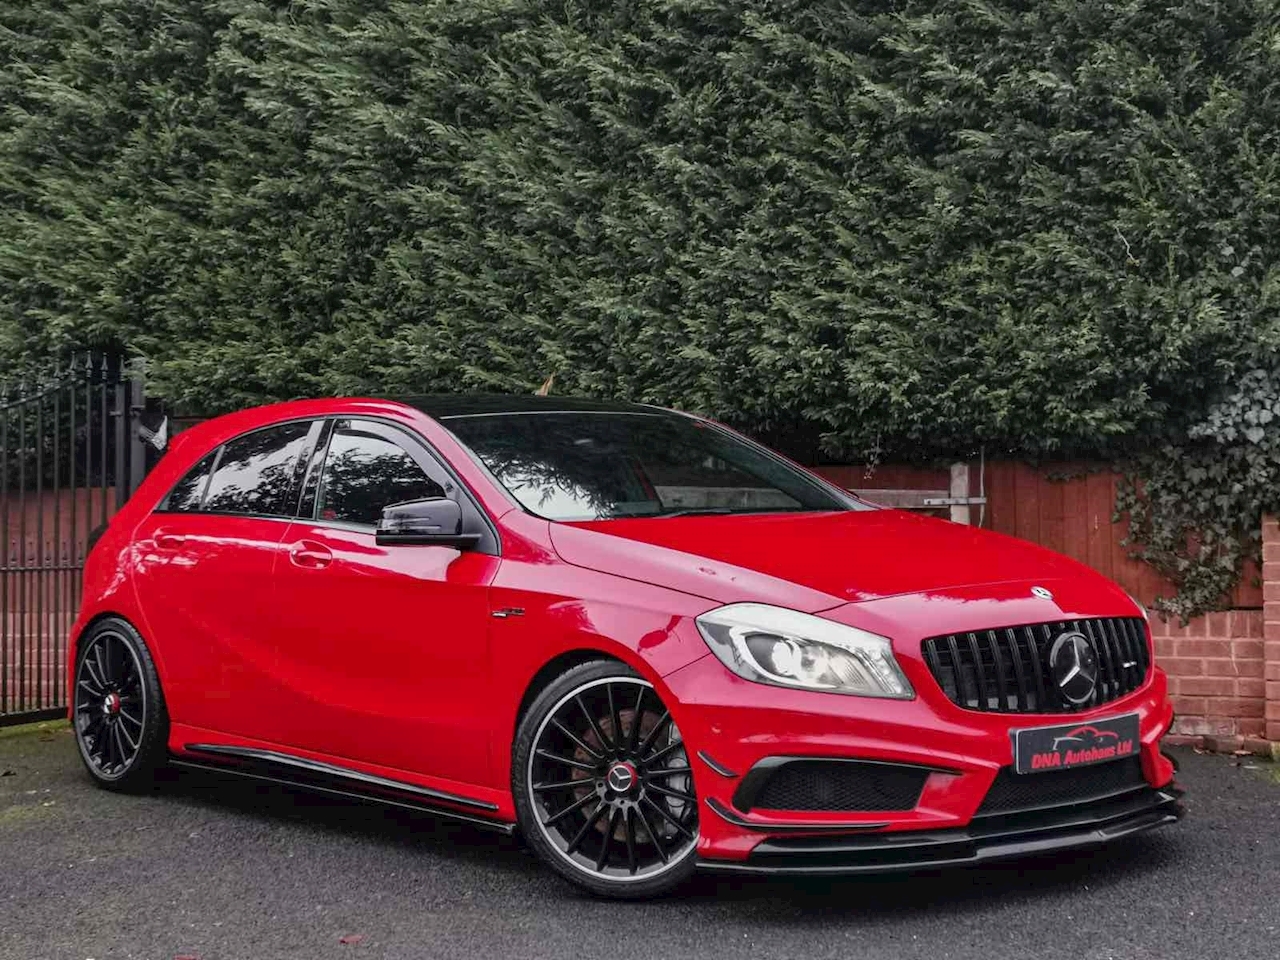 a class amg red